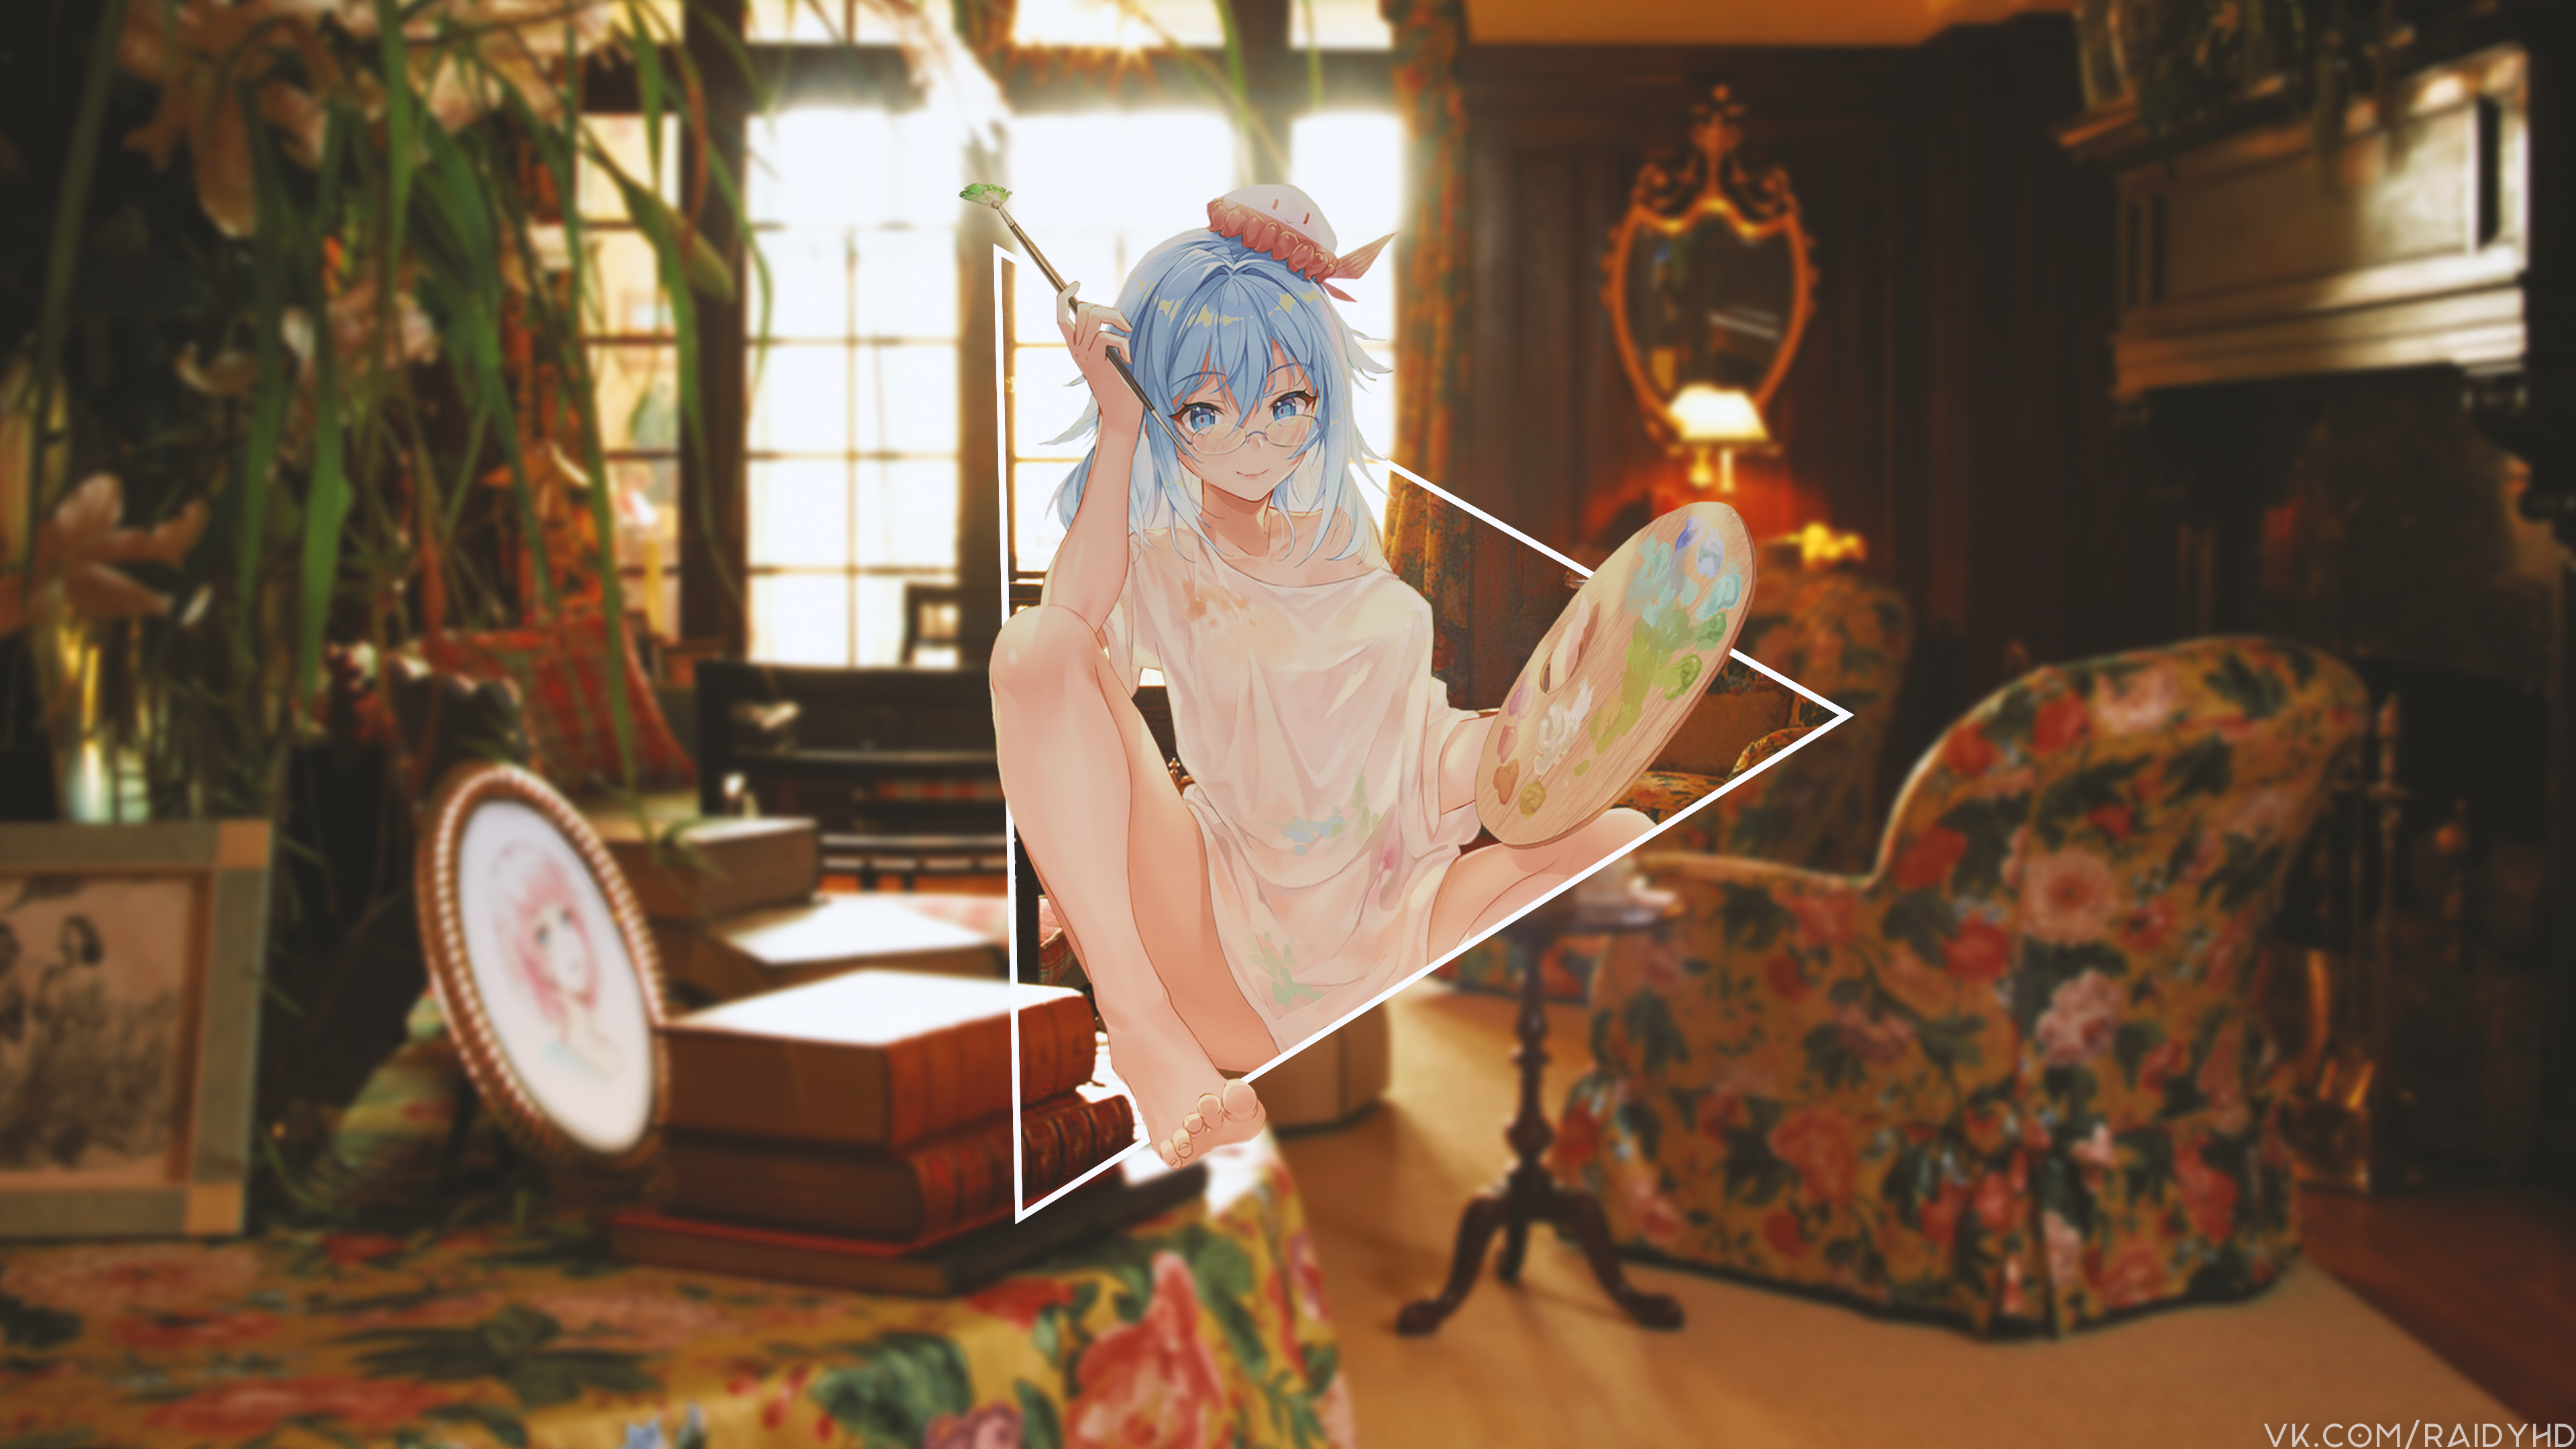 Anime 3840x2160 anime anime girls picture-in-picture barefoot women with glasses blue hair